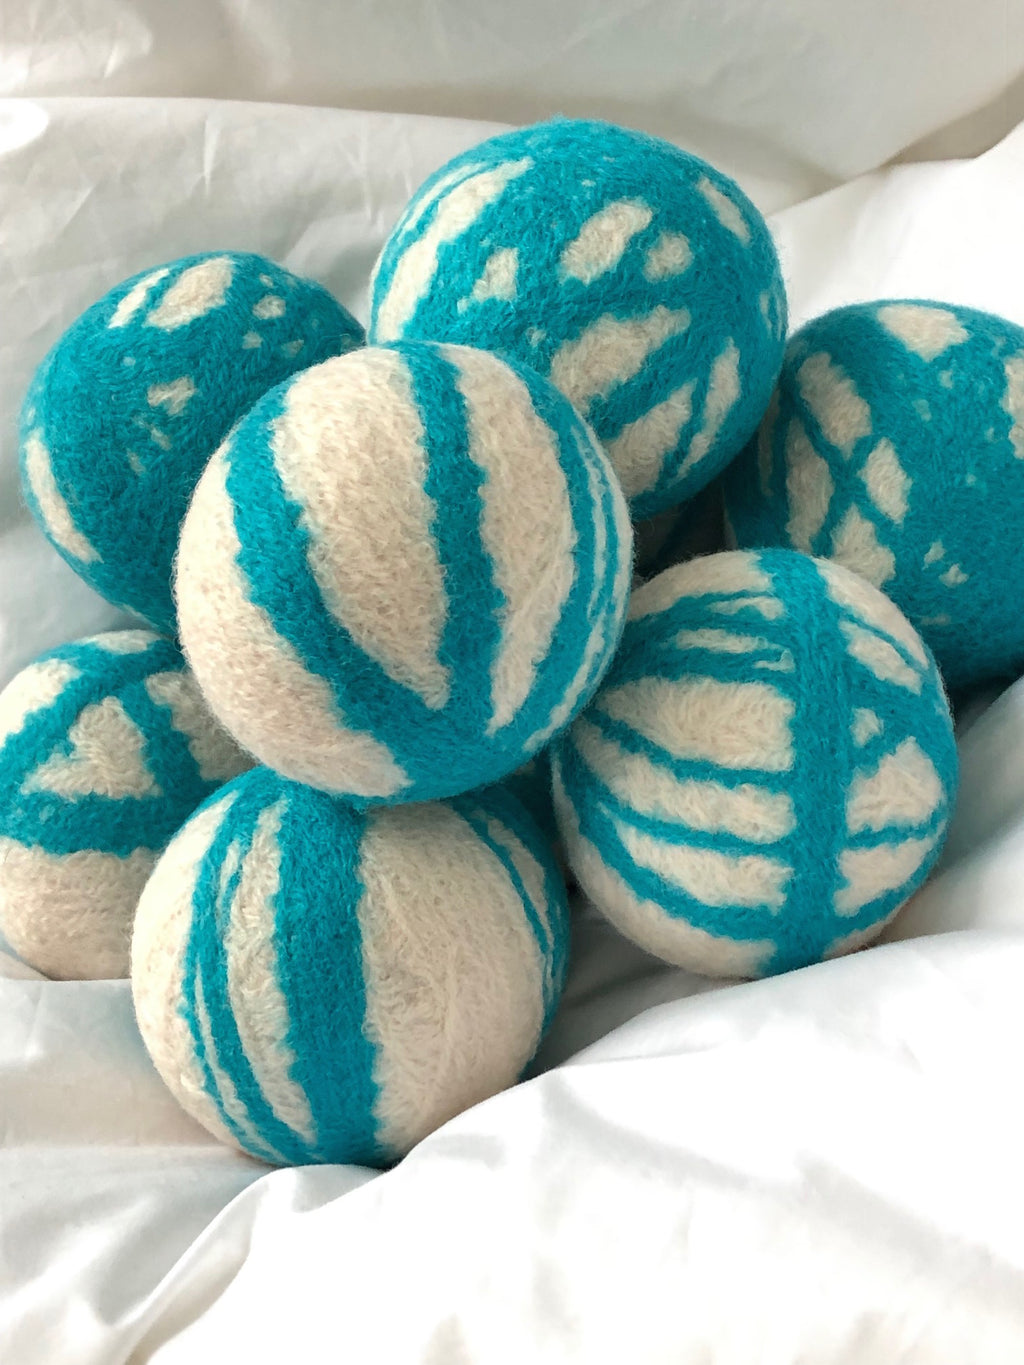 Canadian made 100% wool dryer balls. Eco friendly help reduce drying time without any harsh chemicals. Hand Made in Milton Ontario